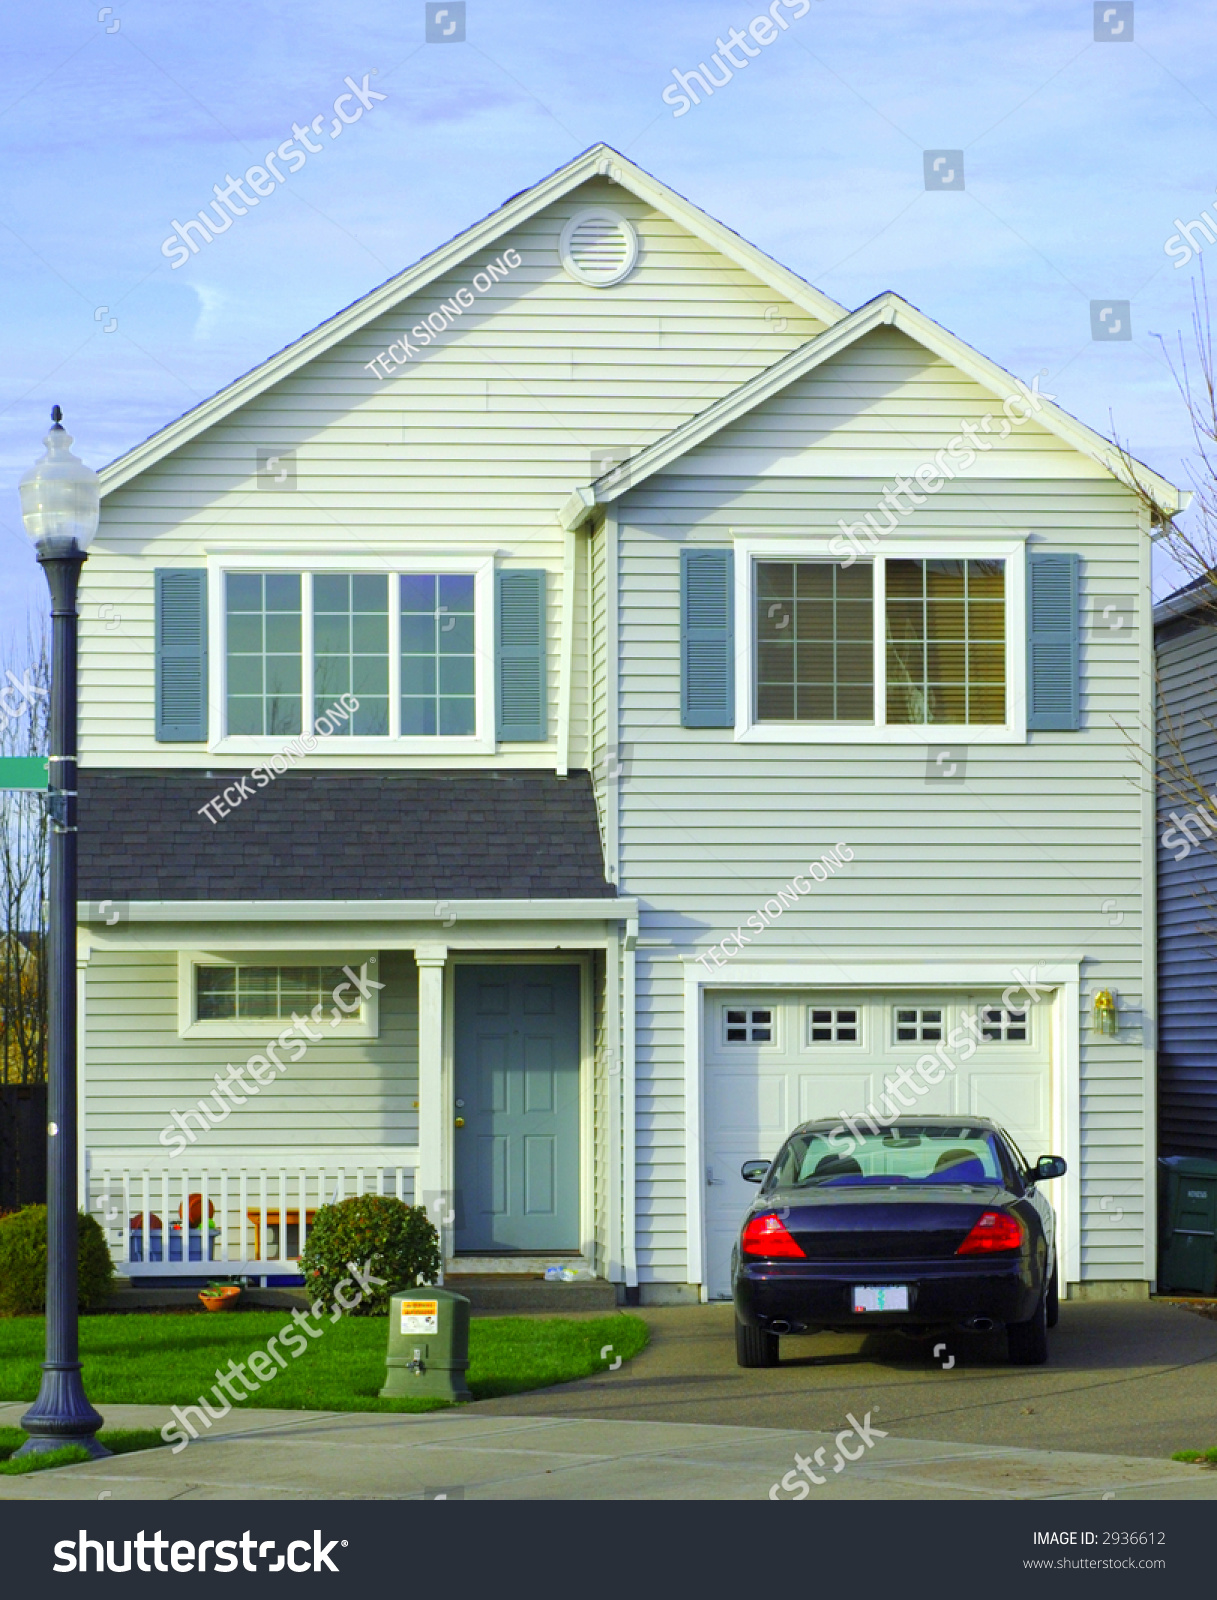 Front View House Car Parking Front Stock Photo 2936612 ...